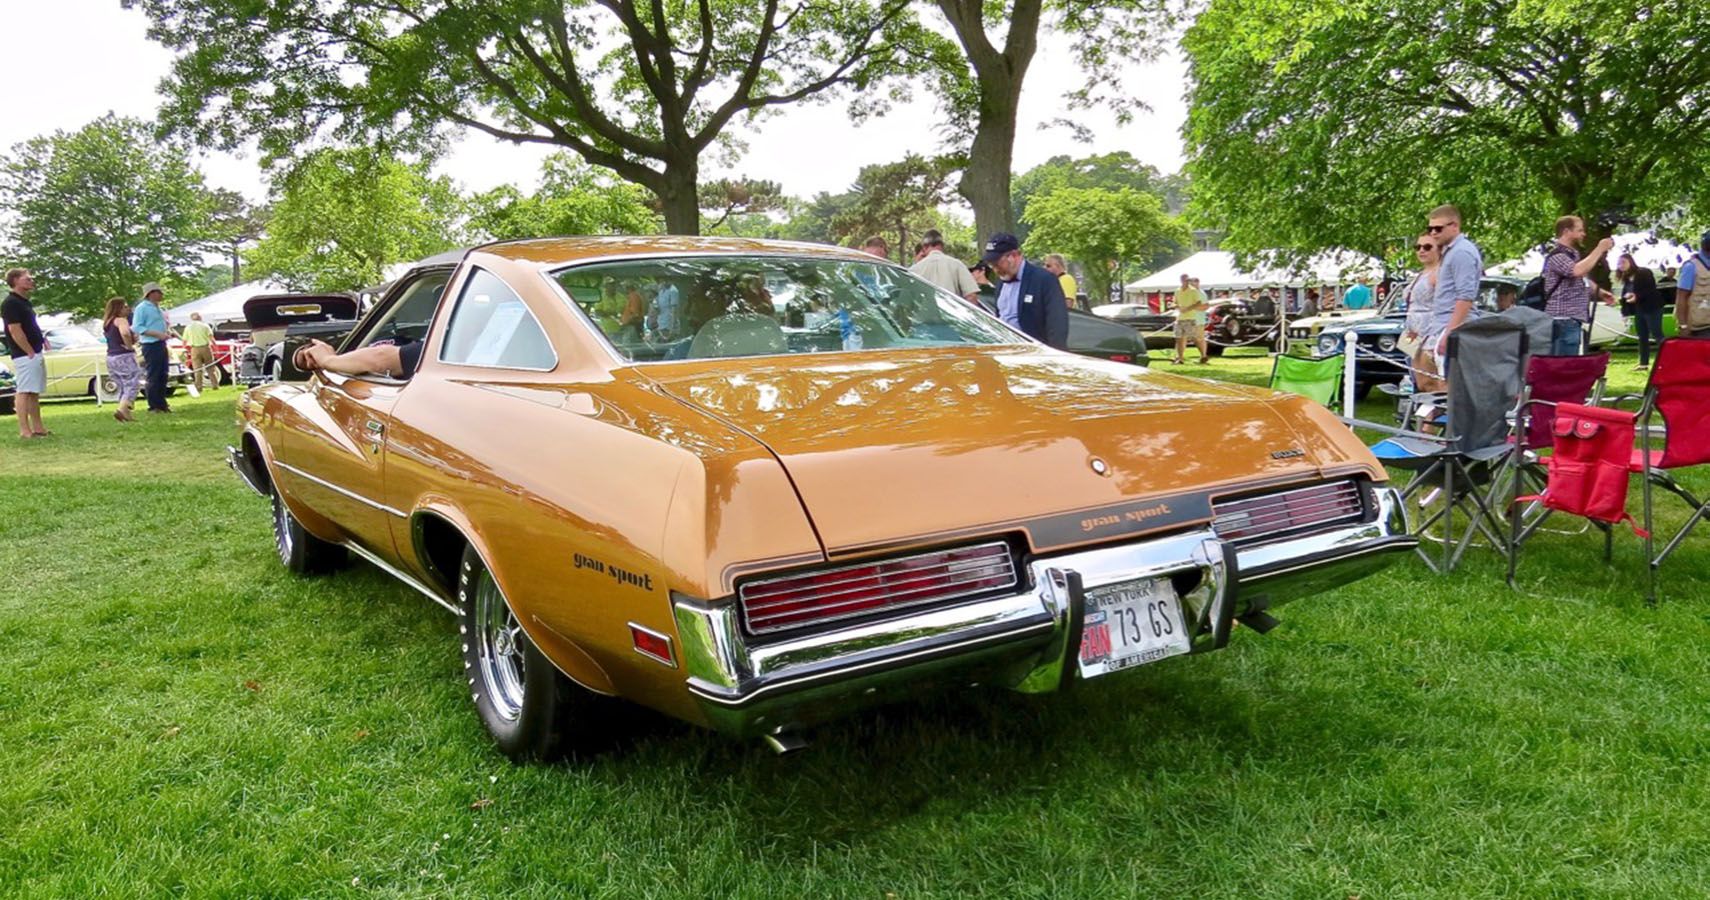 Out Of The 6,500-Plus Buick Century Gran Sports Made For 1973, Only 979 Came Equipped With The Stage 1 7.4-Liter V8, The One That Jetted 270 Horses And Rode Like The Wind